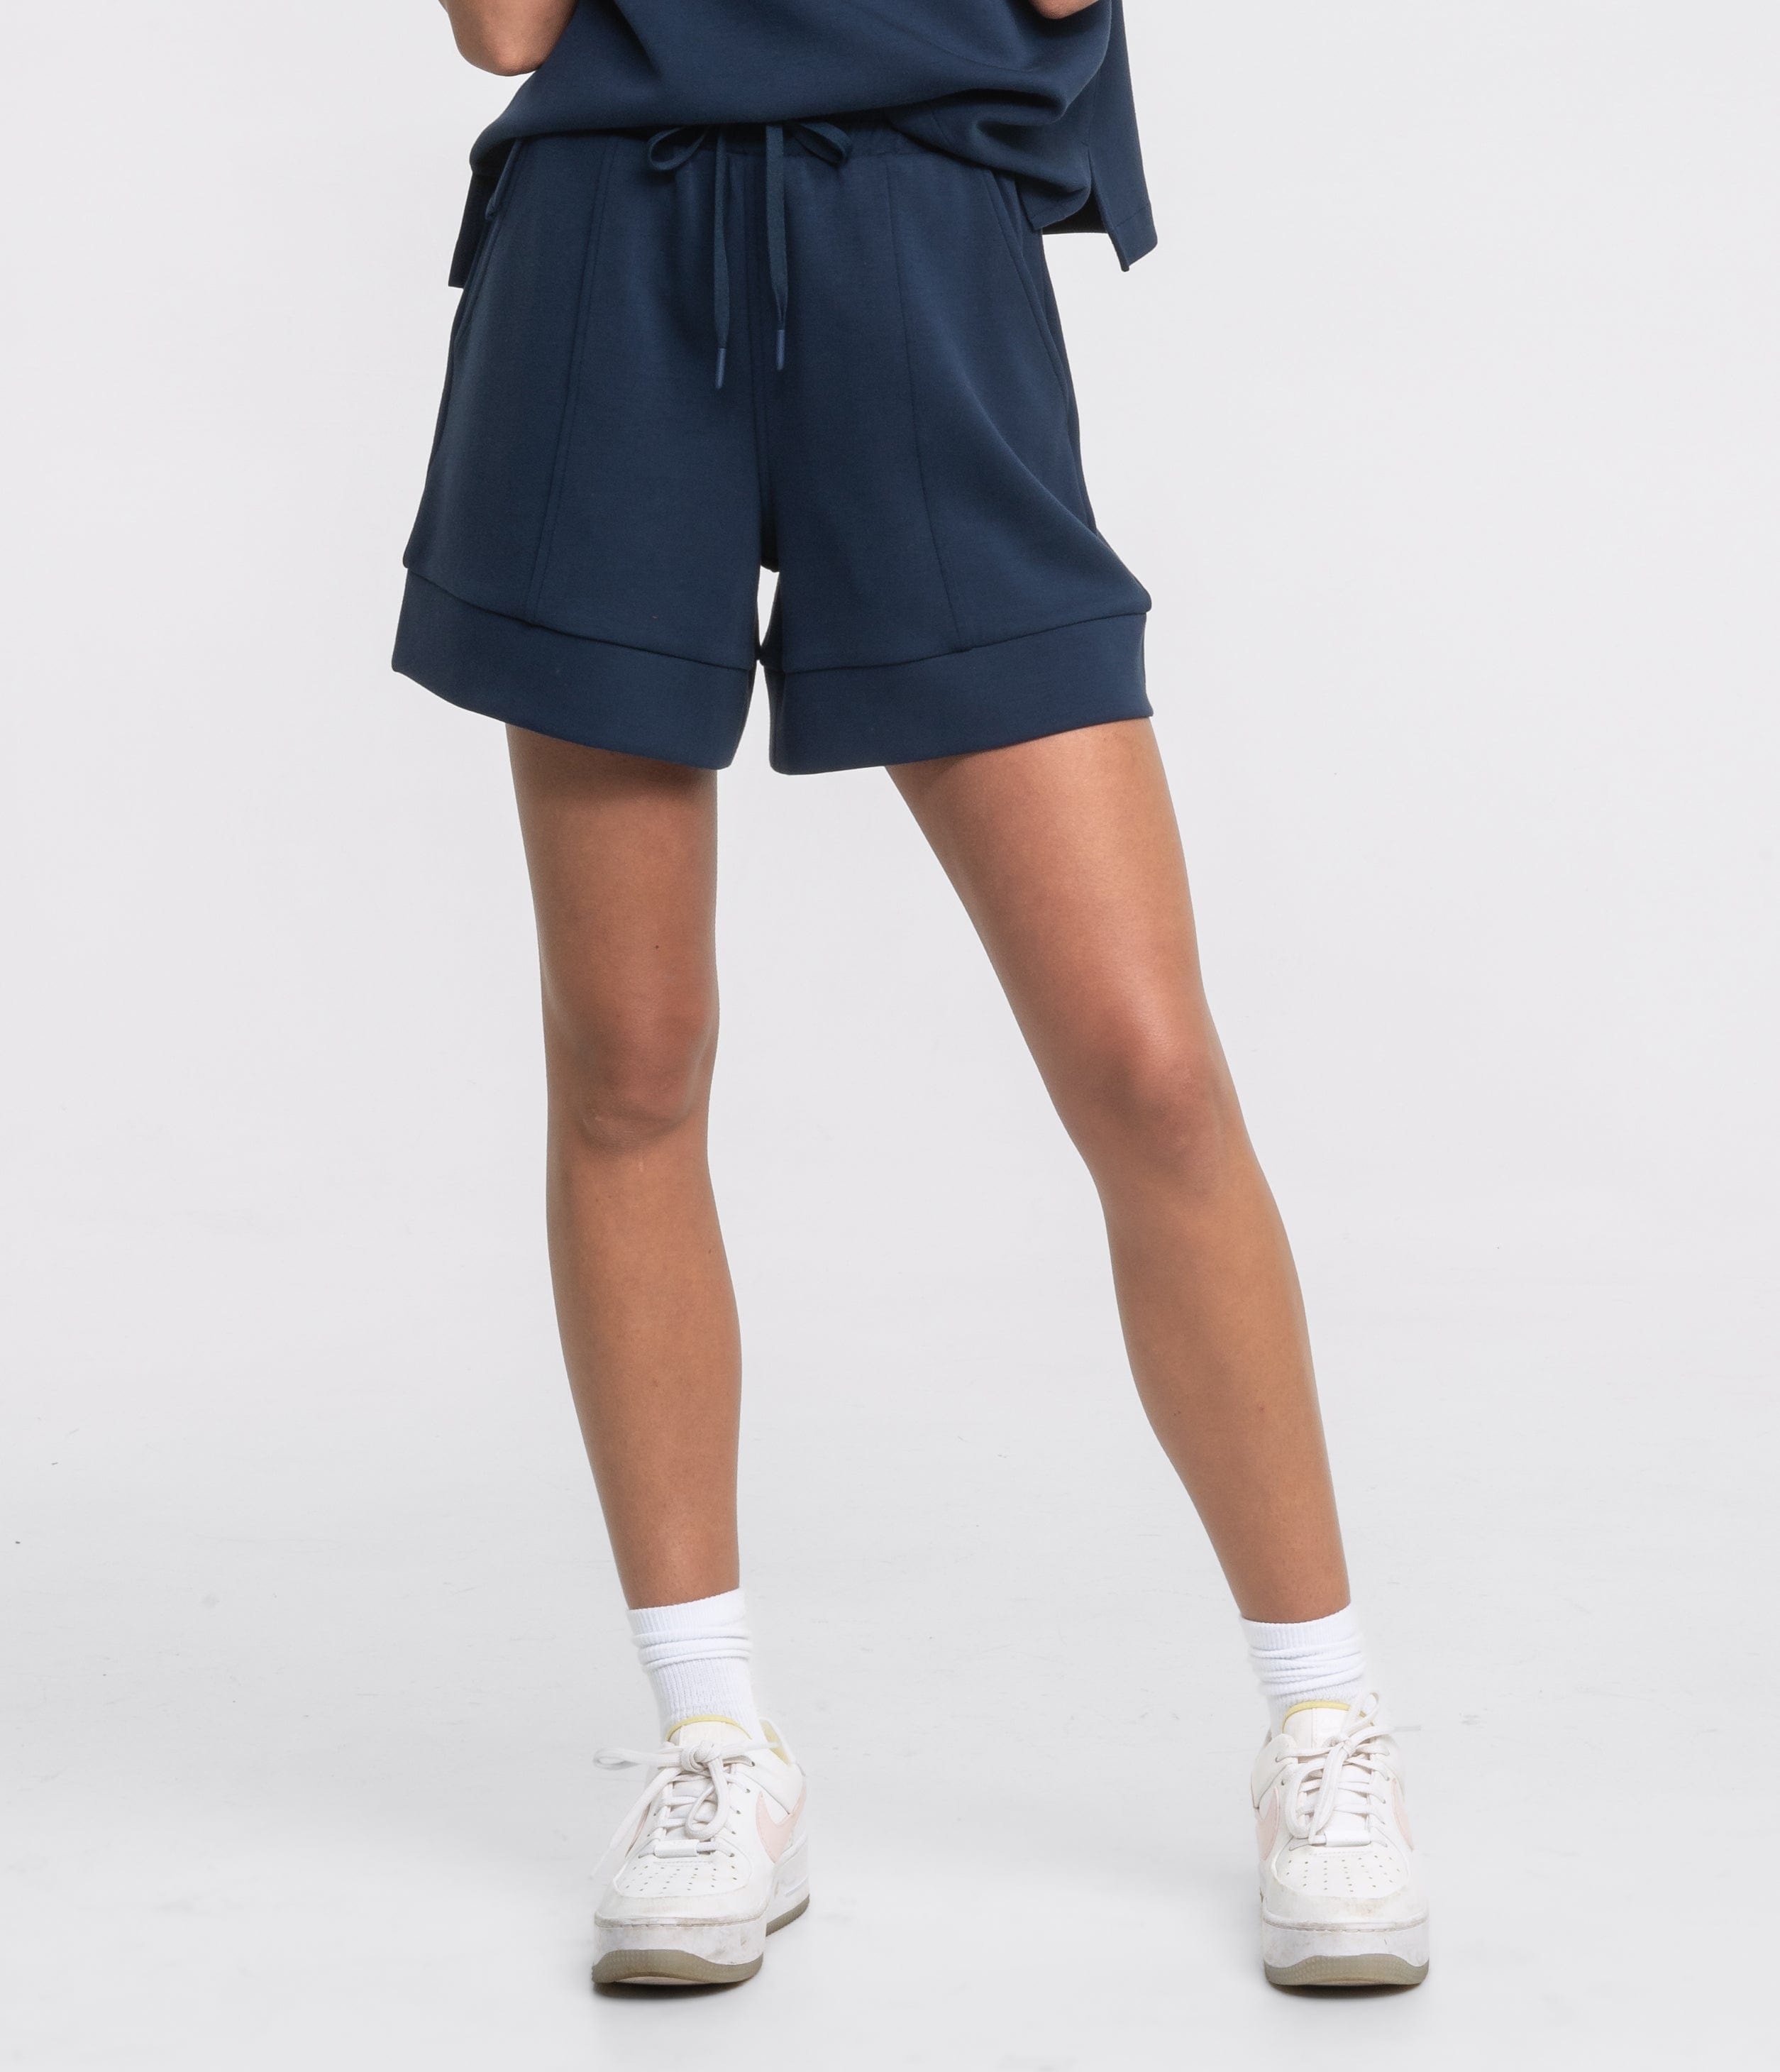 AstroKnit Final Round Shorts - Classic Navy